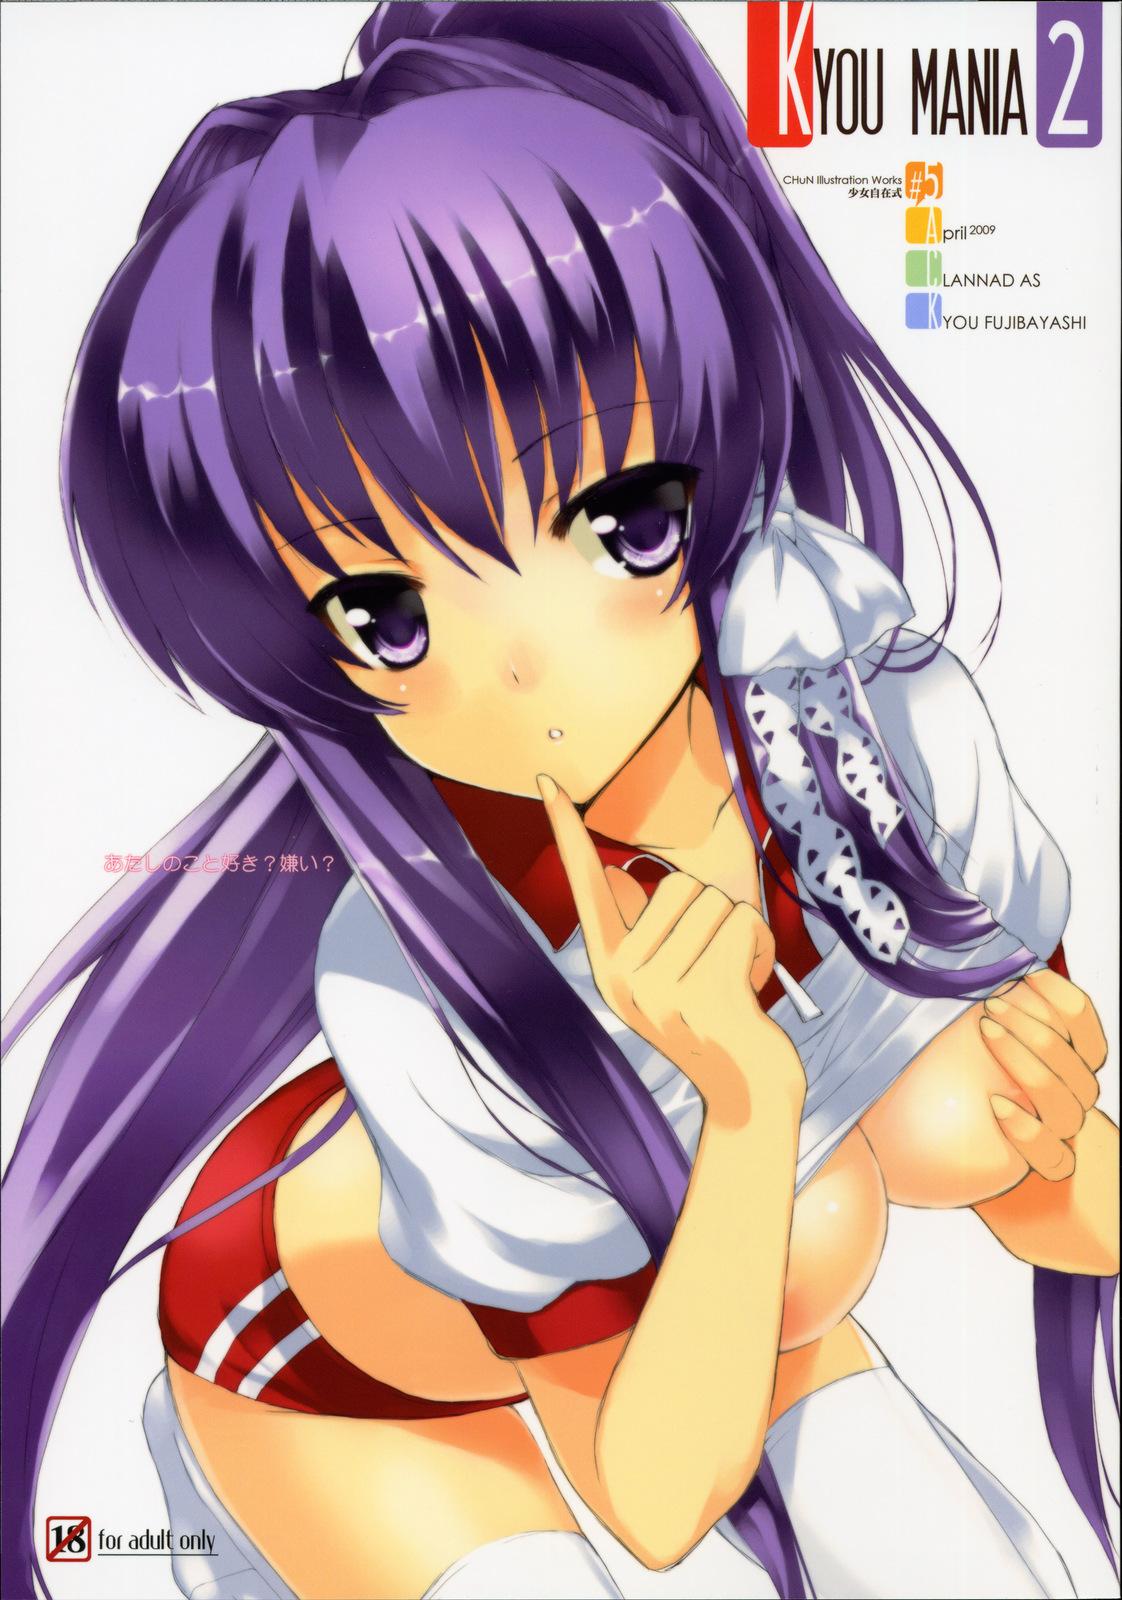 Web KYOU MANIA 2 - Clannad Passionate - Page 1